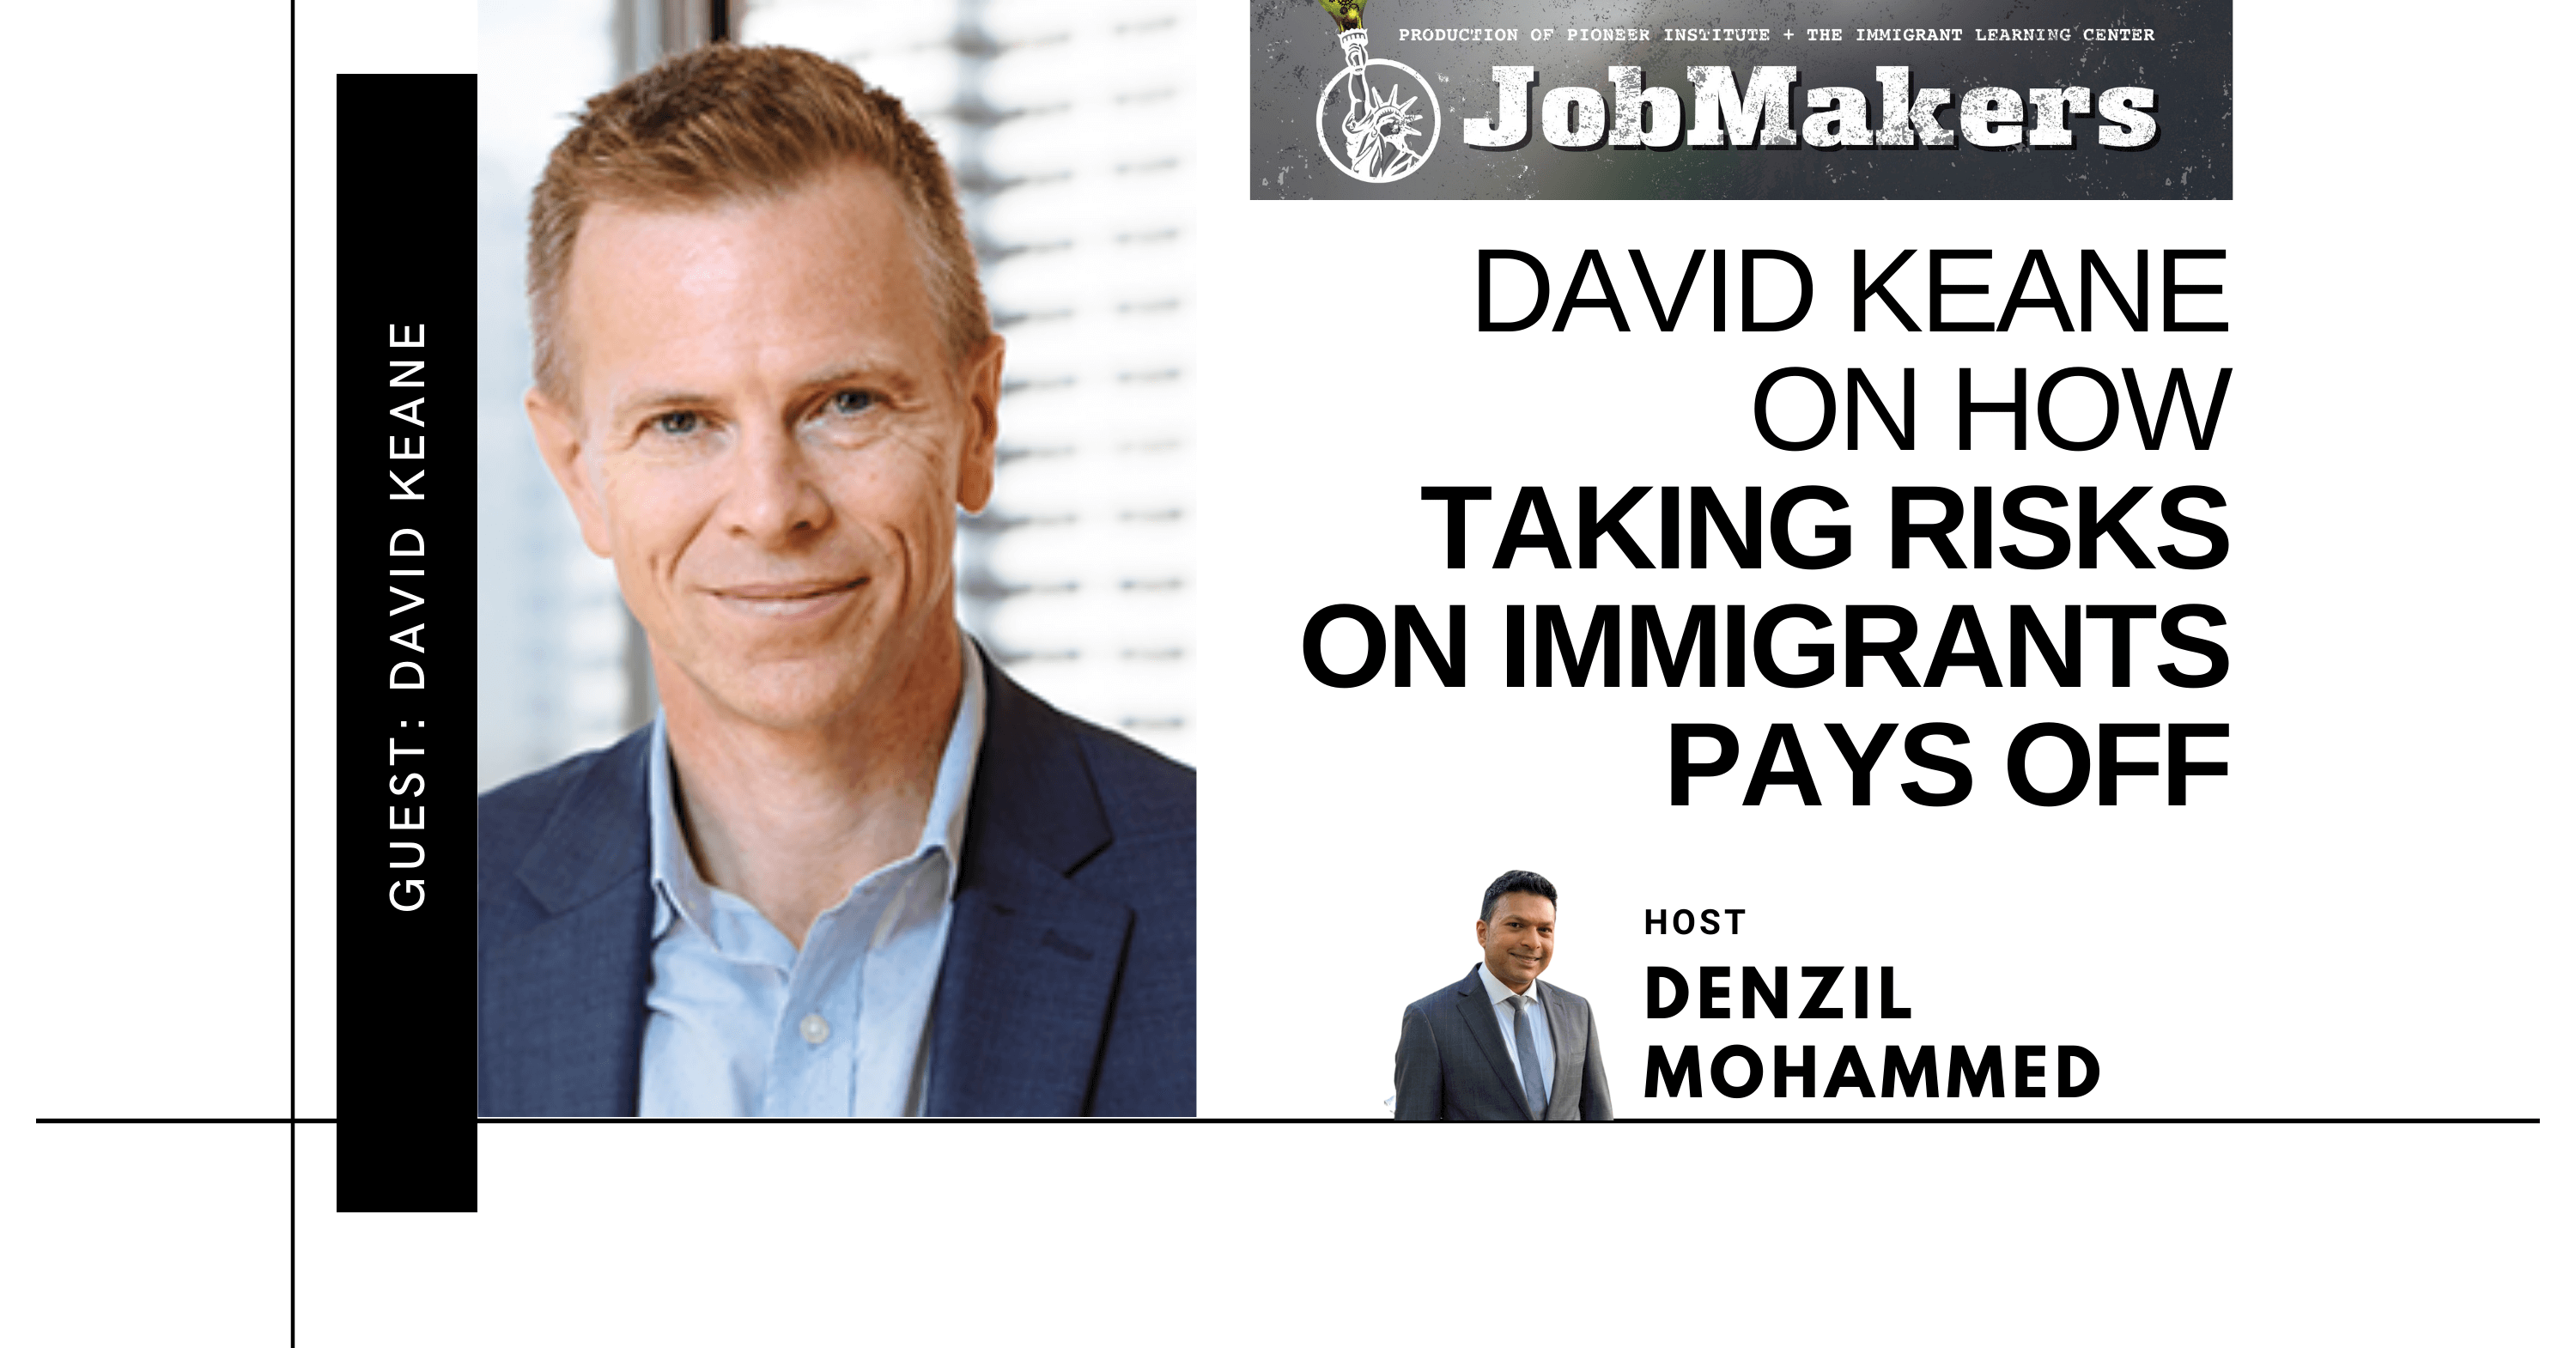 David Keane On How Taking Risks On Immigrants Pays Off